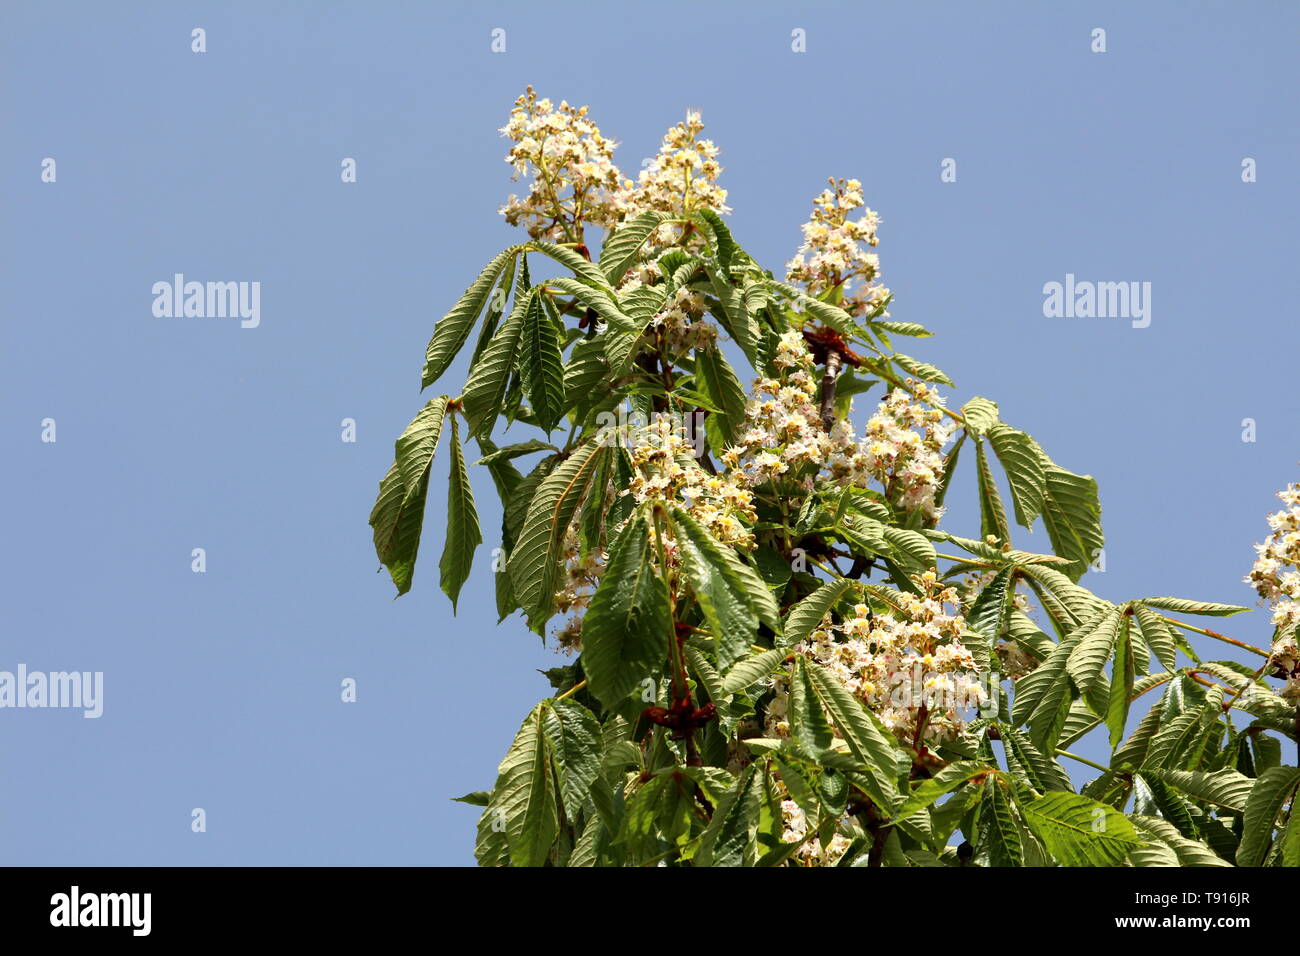 Sweet chestnut or Castanea sativa or Spanish chestnut or Portuguese chestnut or Marron substantial long lived deciduous tree with oblong lanceolate Stock Photo